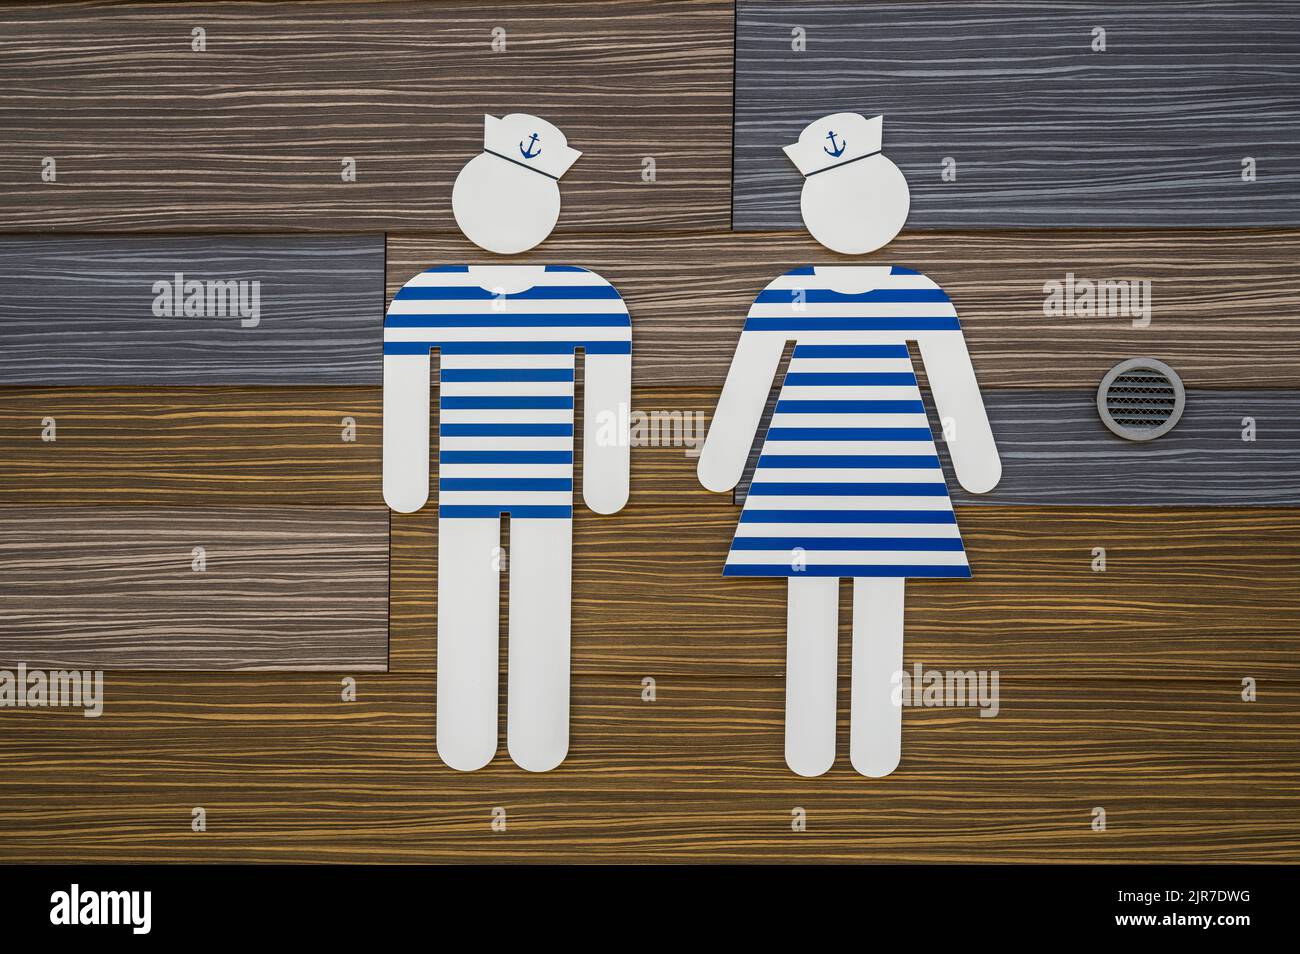 tolilet sign showing silhouettes of a man and a woman dressed in sailor suits, Denmark, August 8, 2022 Stock Photo